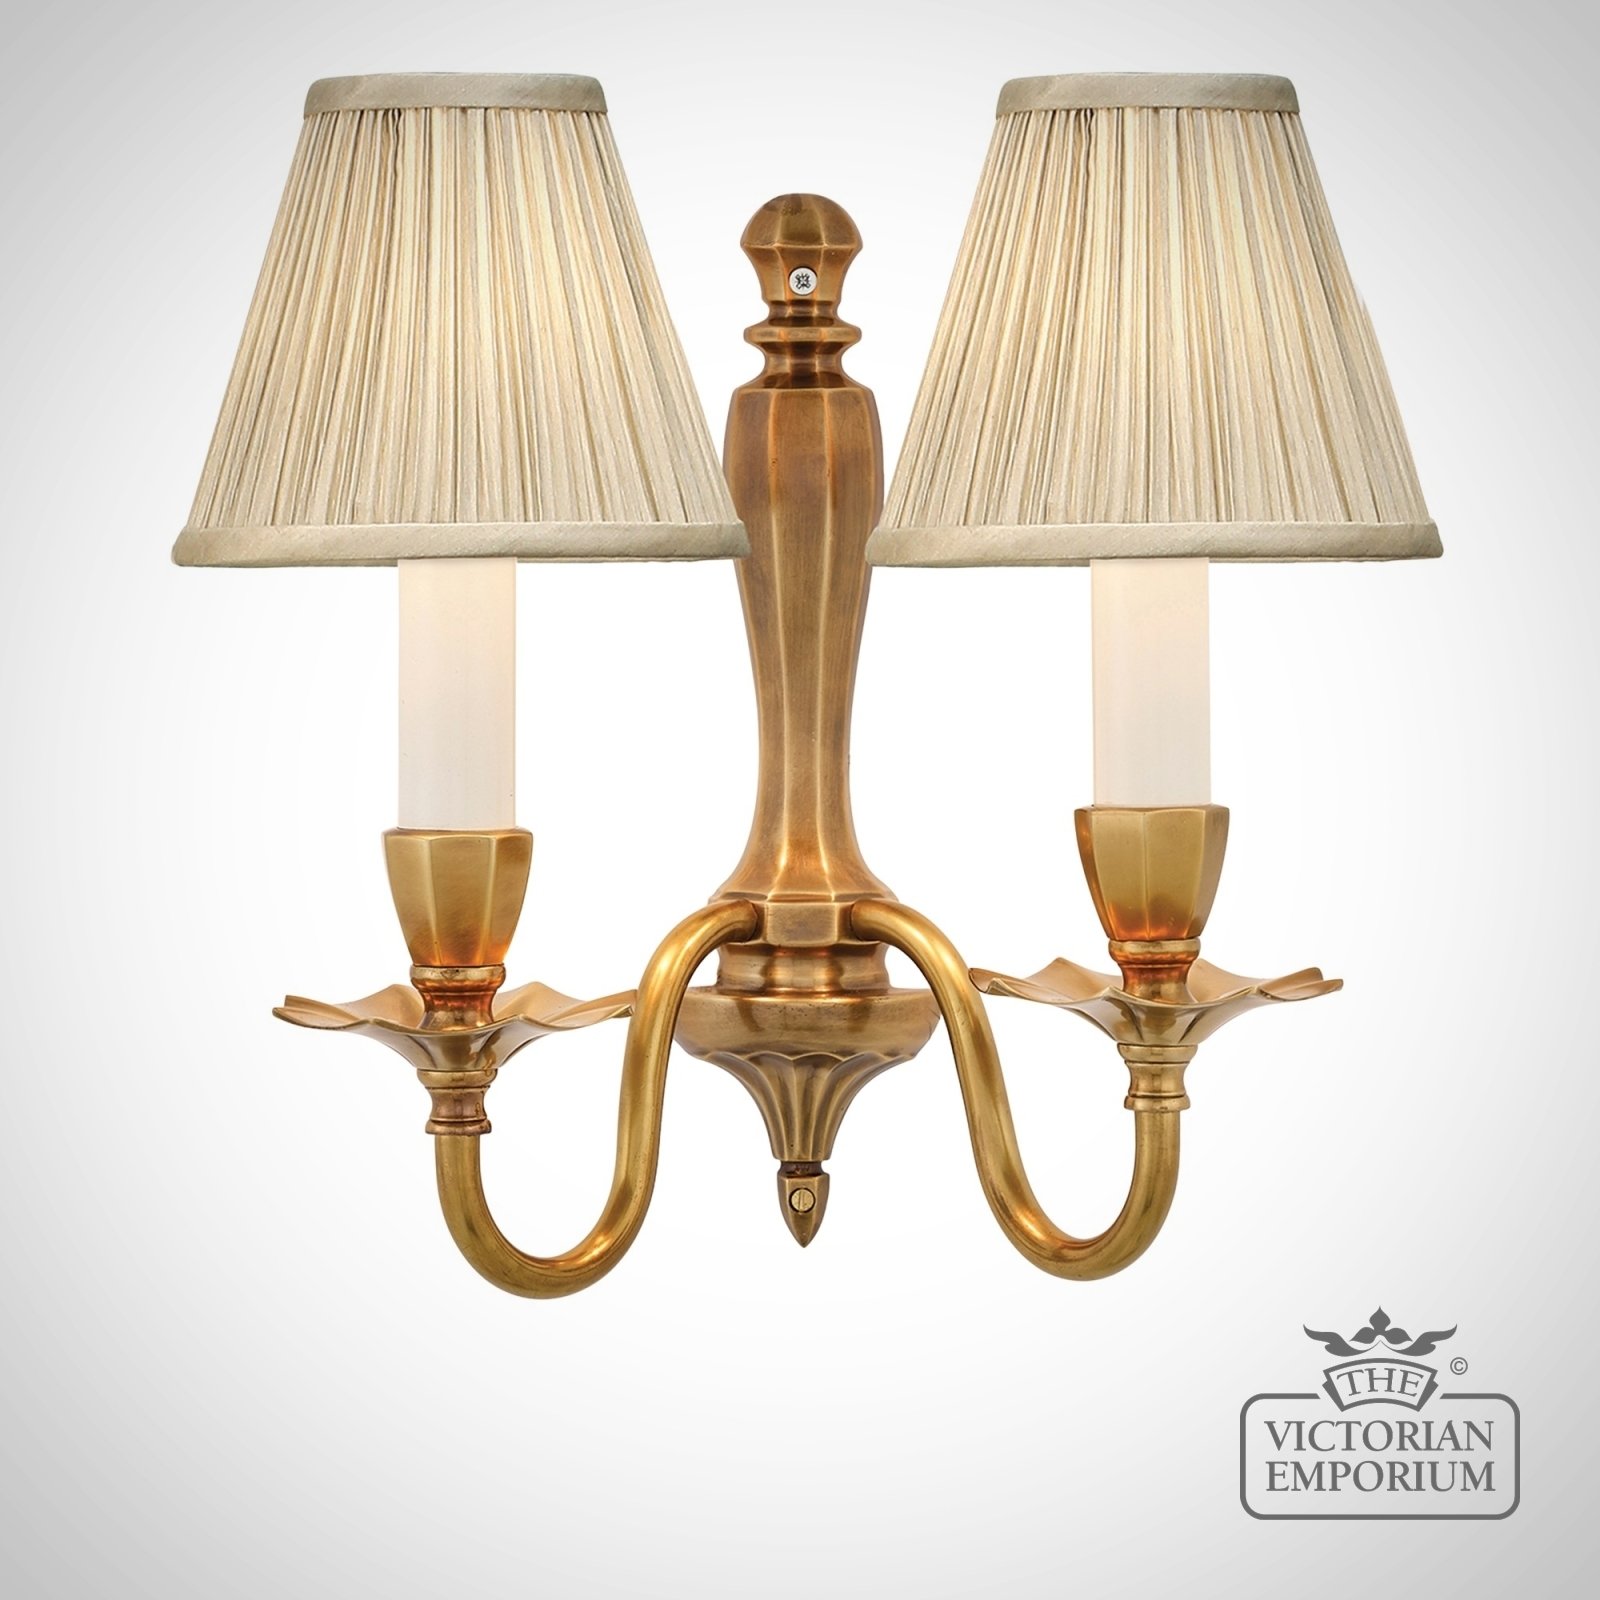 Asquith twin wall light with or without beige shades